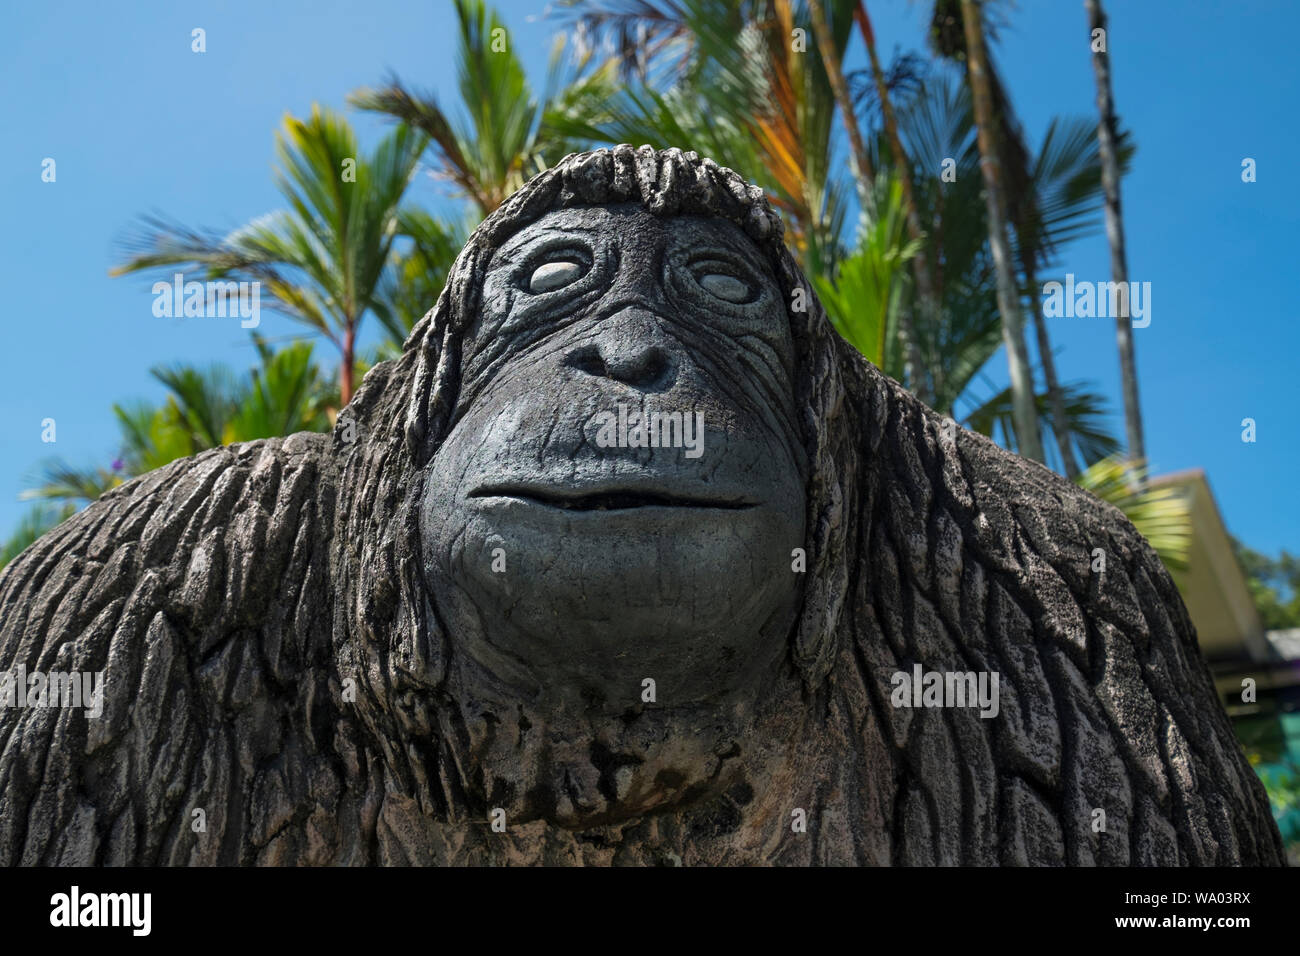 A concrete orangutan sculpture at the entrance to the Semenggoh Nature Reserve in Kuching, Malaysia. Stock Photo